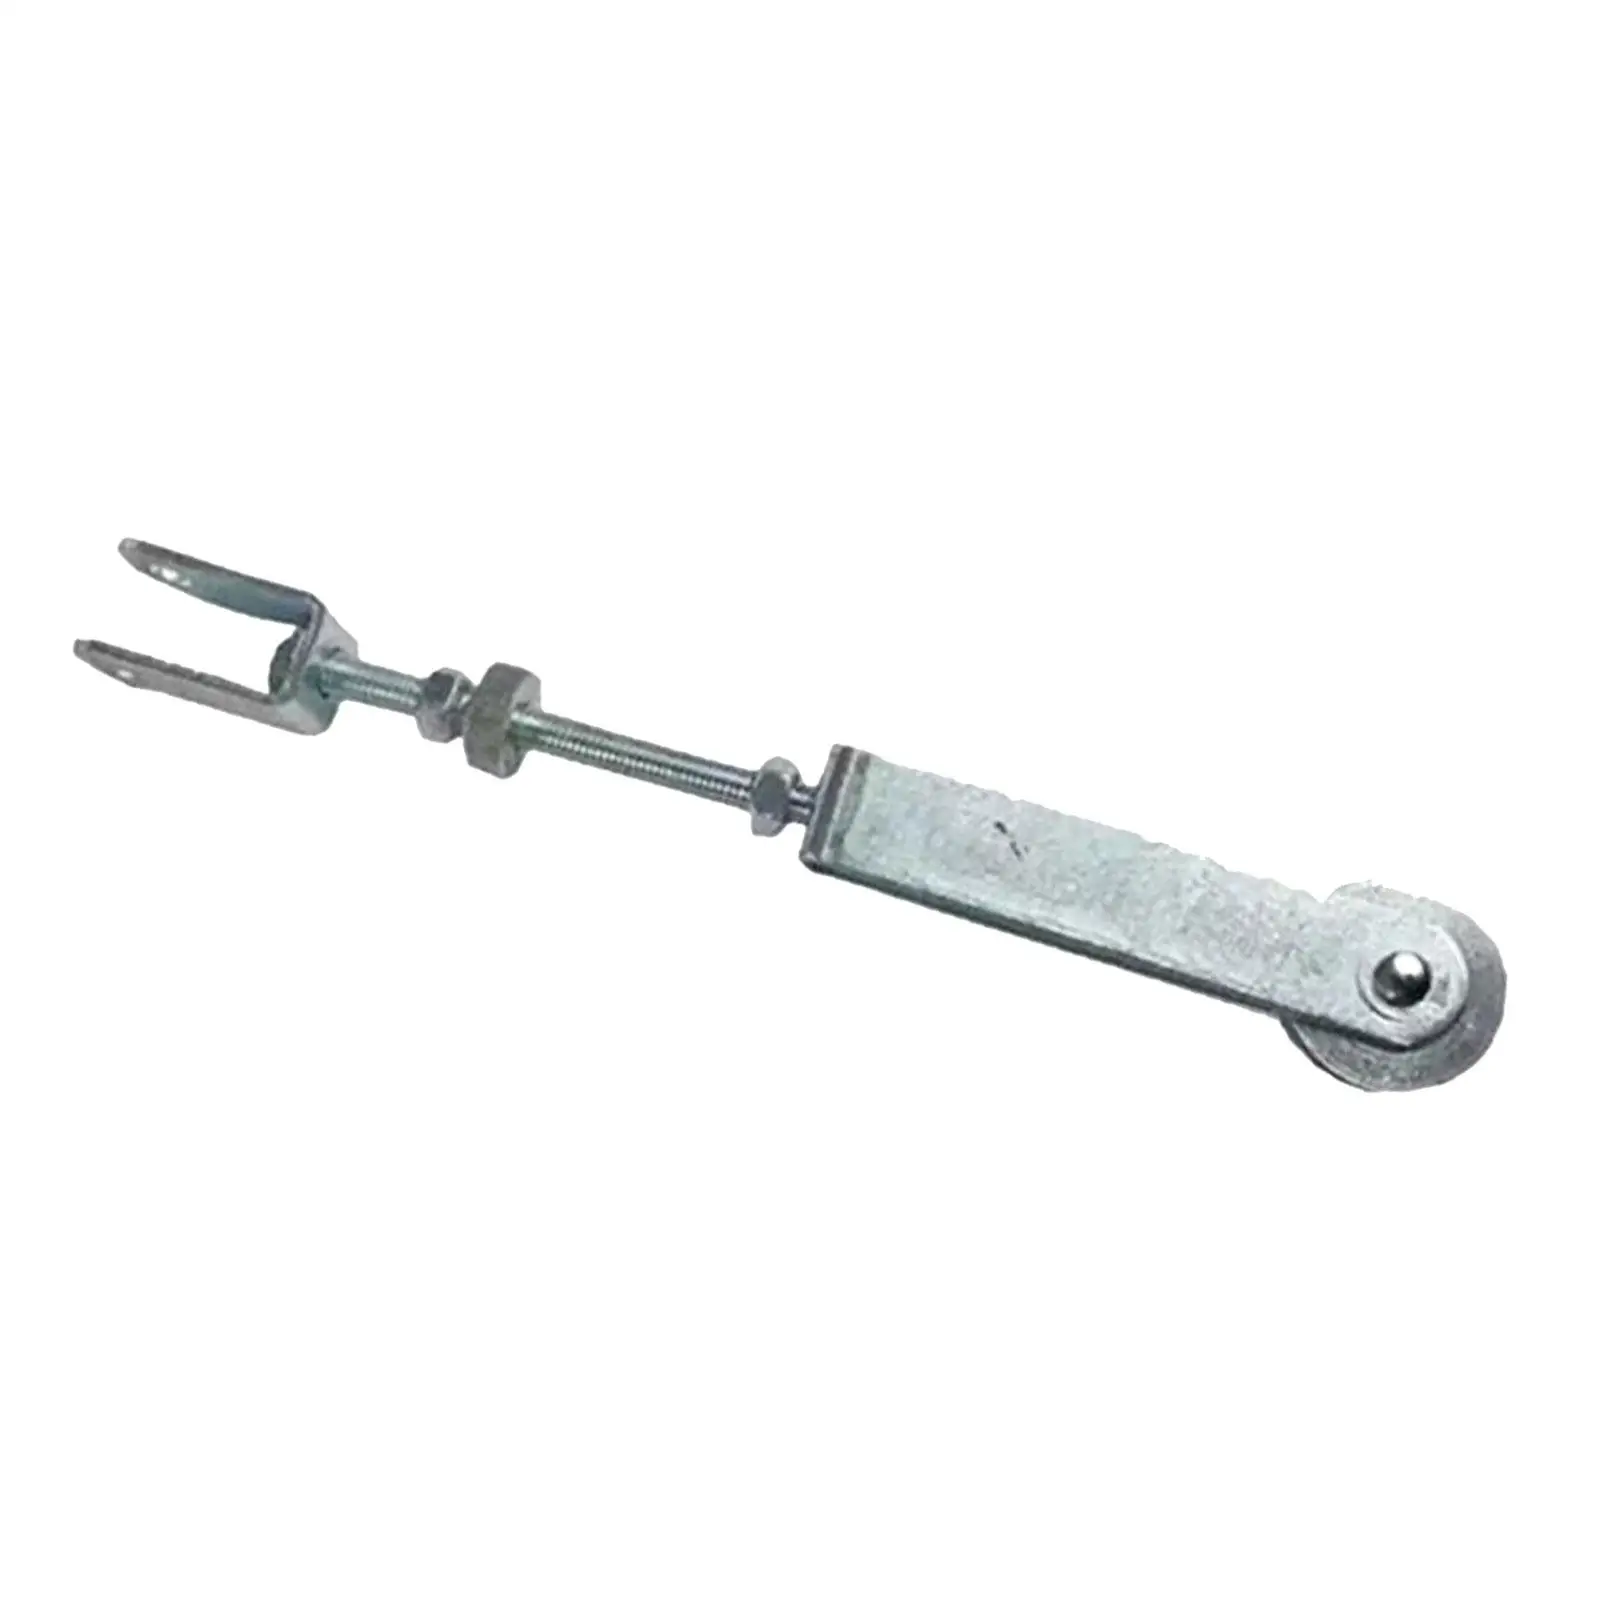 Parking Brake Cable Adjuster Stainless Steel Galvanized for Car Ramp